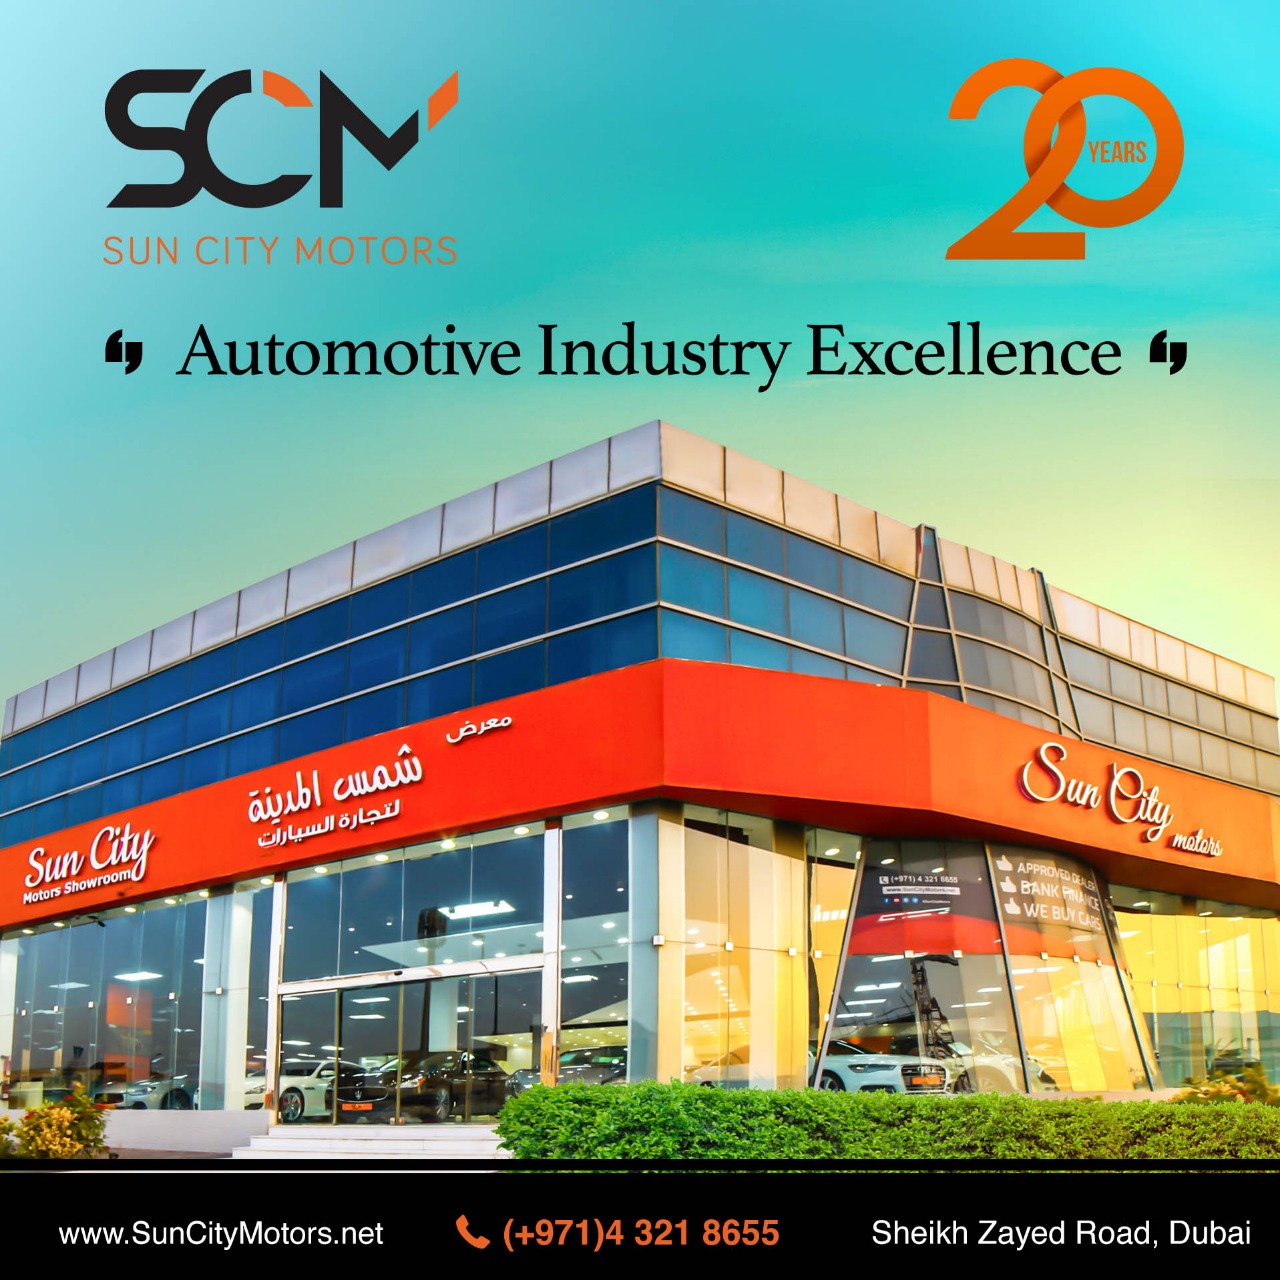 Sun City Motors Celebrates 20 Glorious Years in the Industry